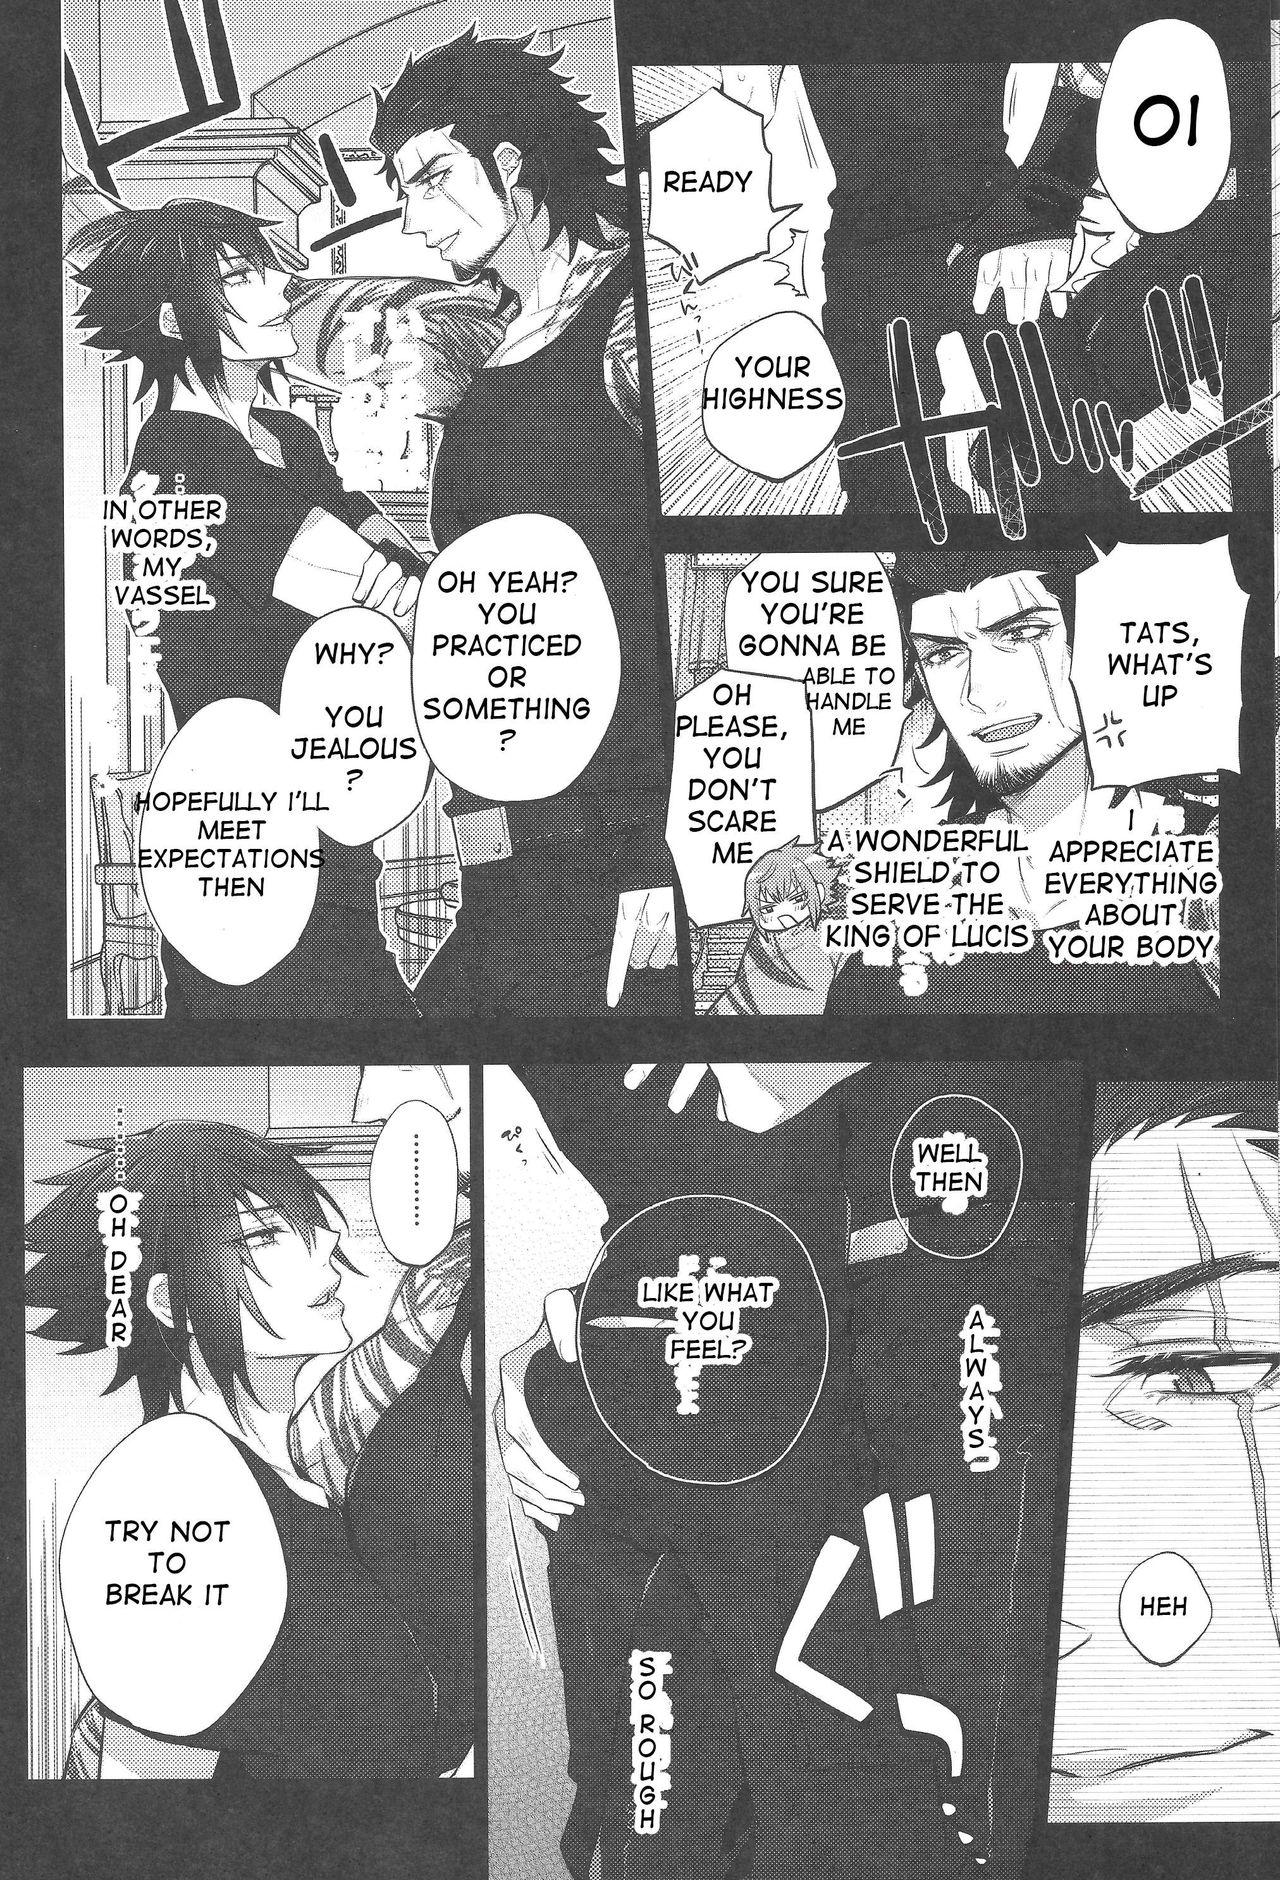 Speculum Aisare ♥ Ouji Visual Kei | Our Beloved Prince - Final fantasy xv Livesex - Page 9